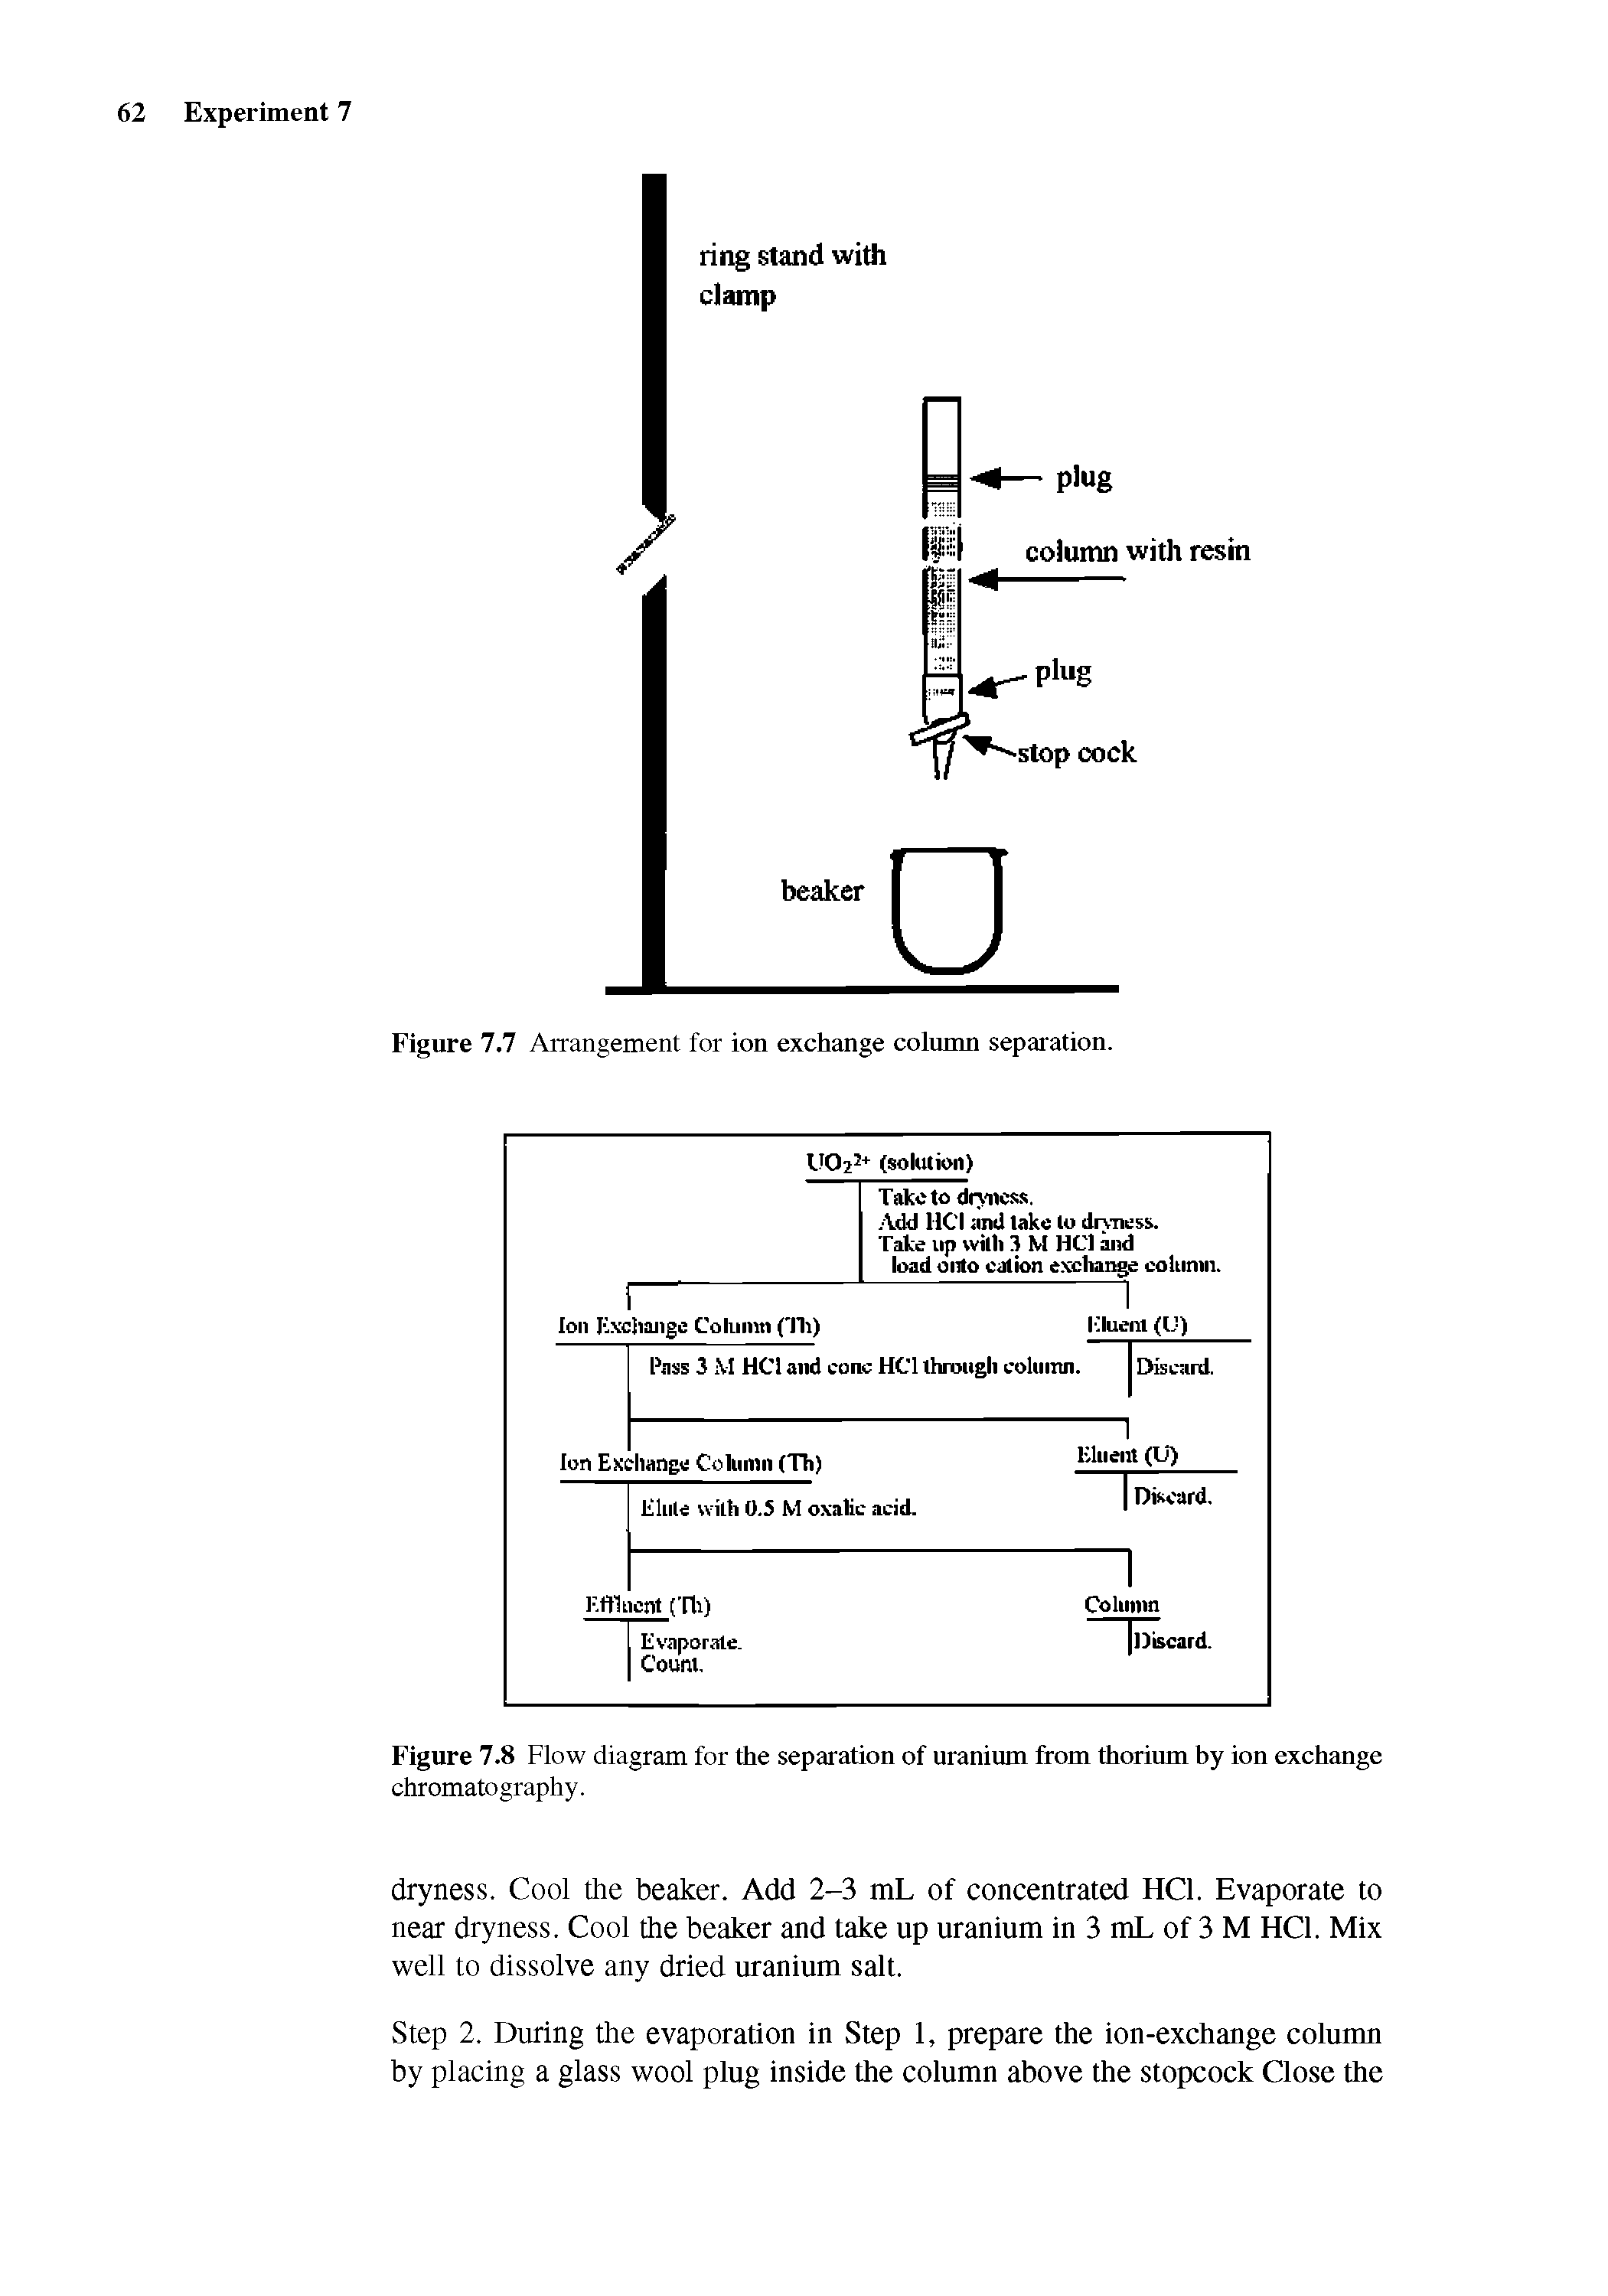 Figure 7.8 Flow diagram for the separation of uranium from thorium by ion exchange chromatography.